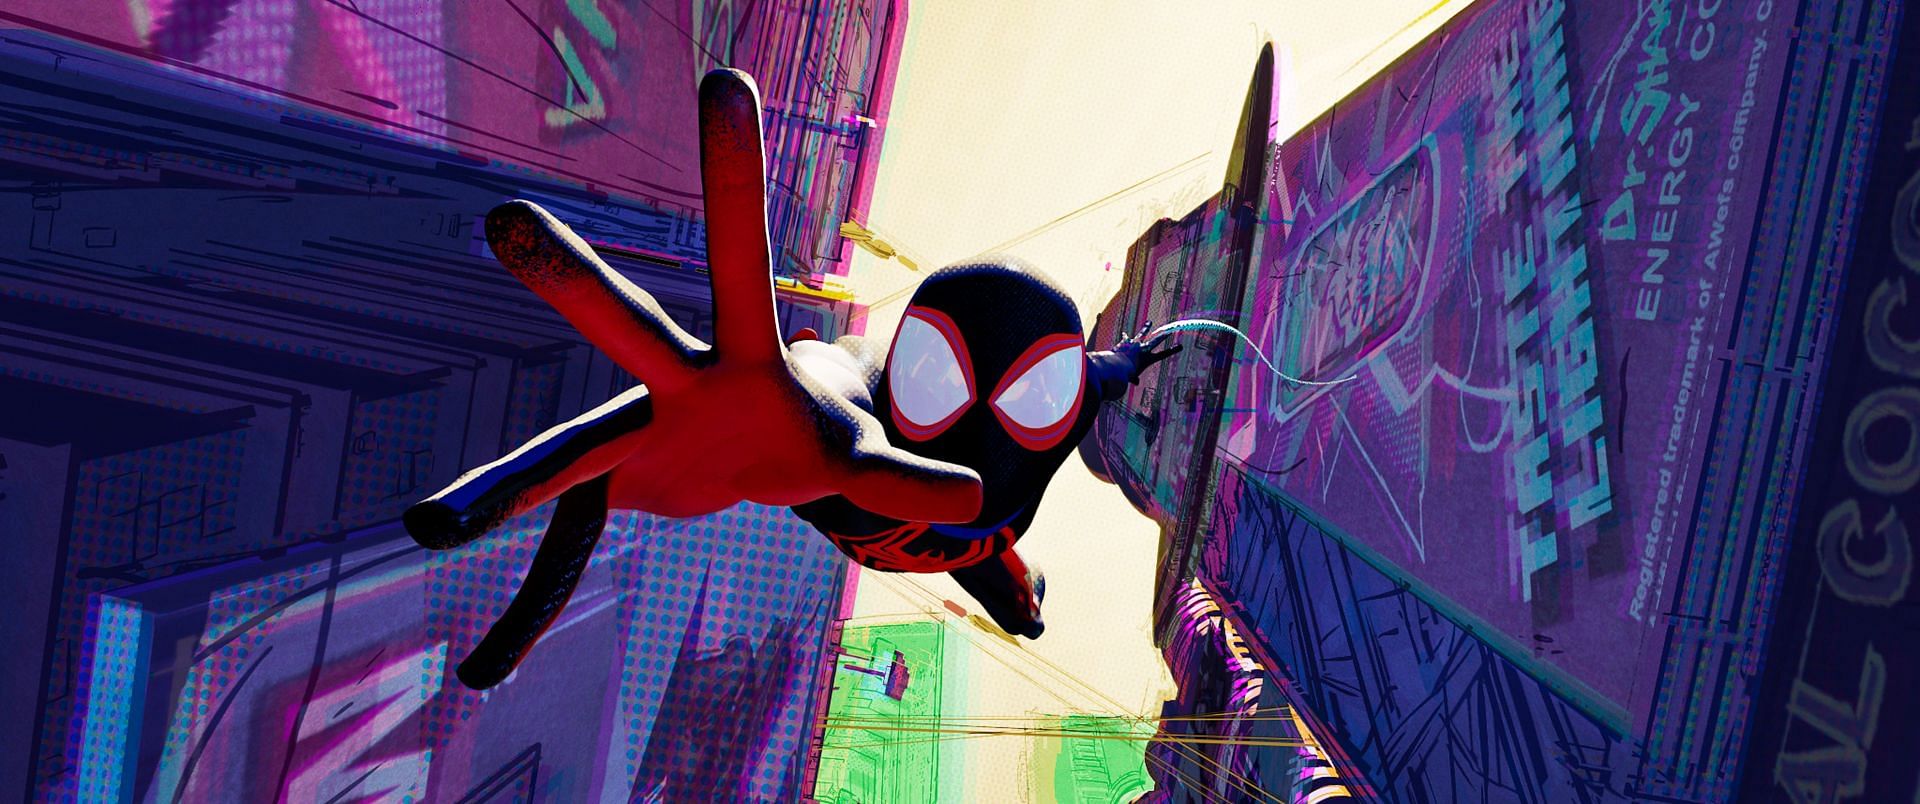 Will Miles Morales face his hardest choice yet? The Spider-Man: Across the Spider-Verse trailer hints at tragedy and tough decisions ahead (Image via Sony Pictures)